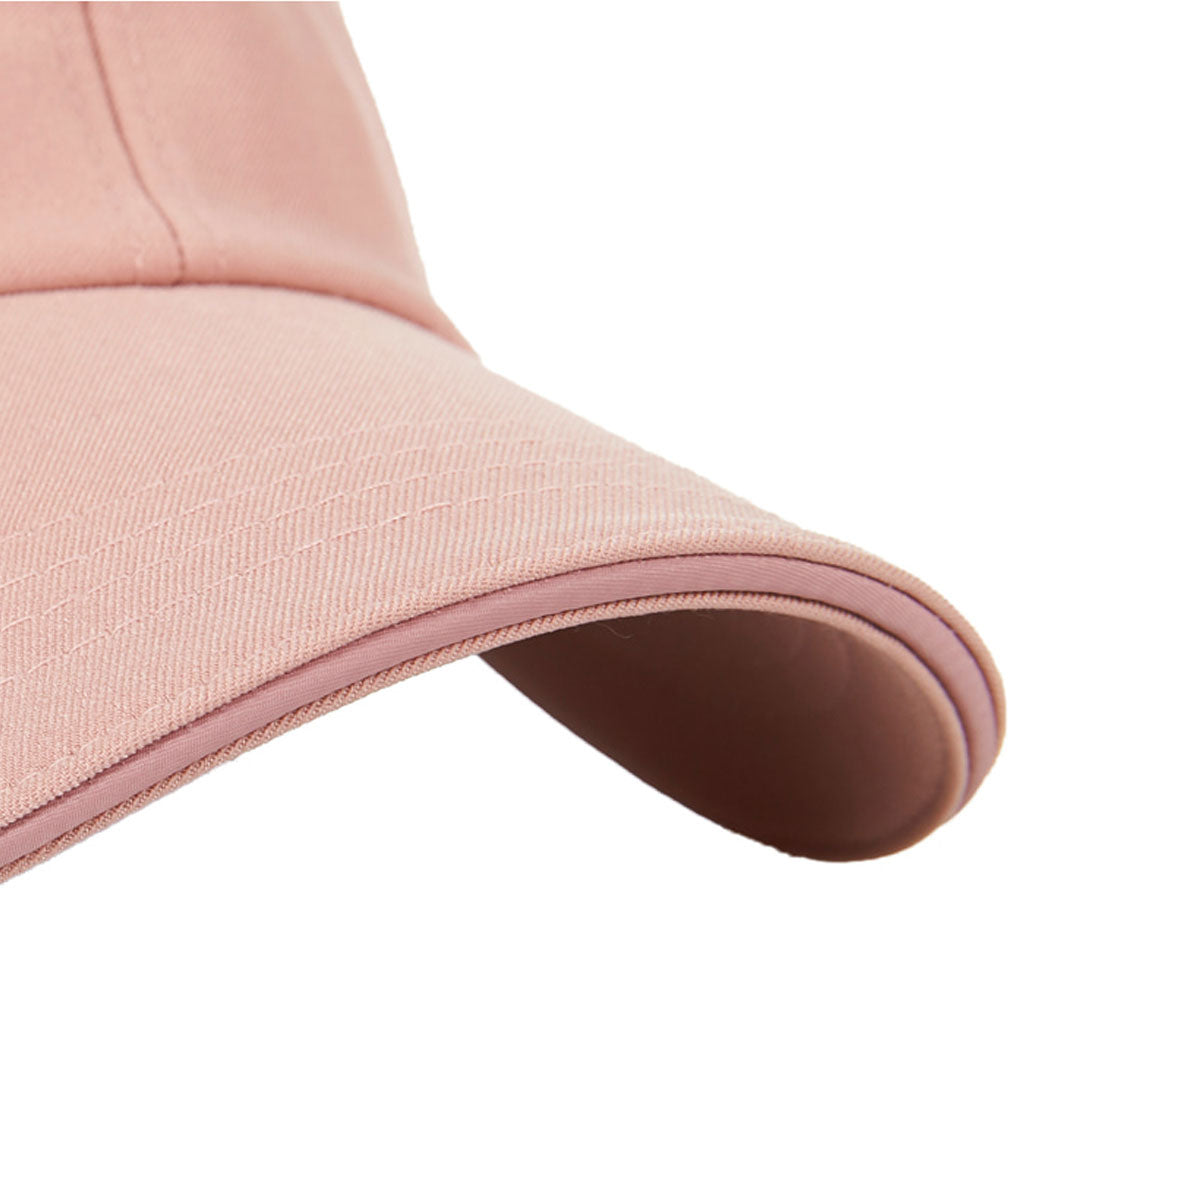 VARZAR - GOLD STUD OVER FIT BALL CAP PINK [VZR4-0005]